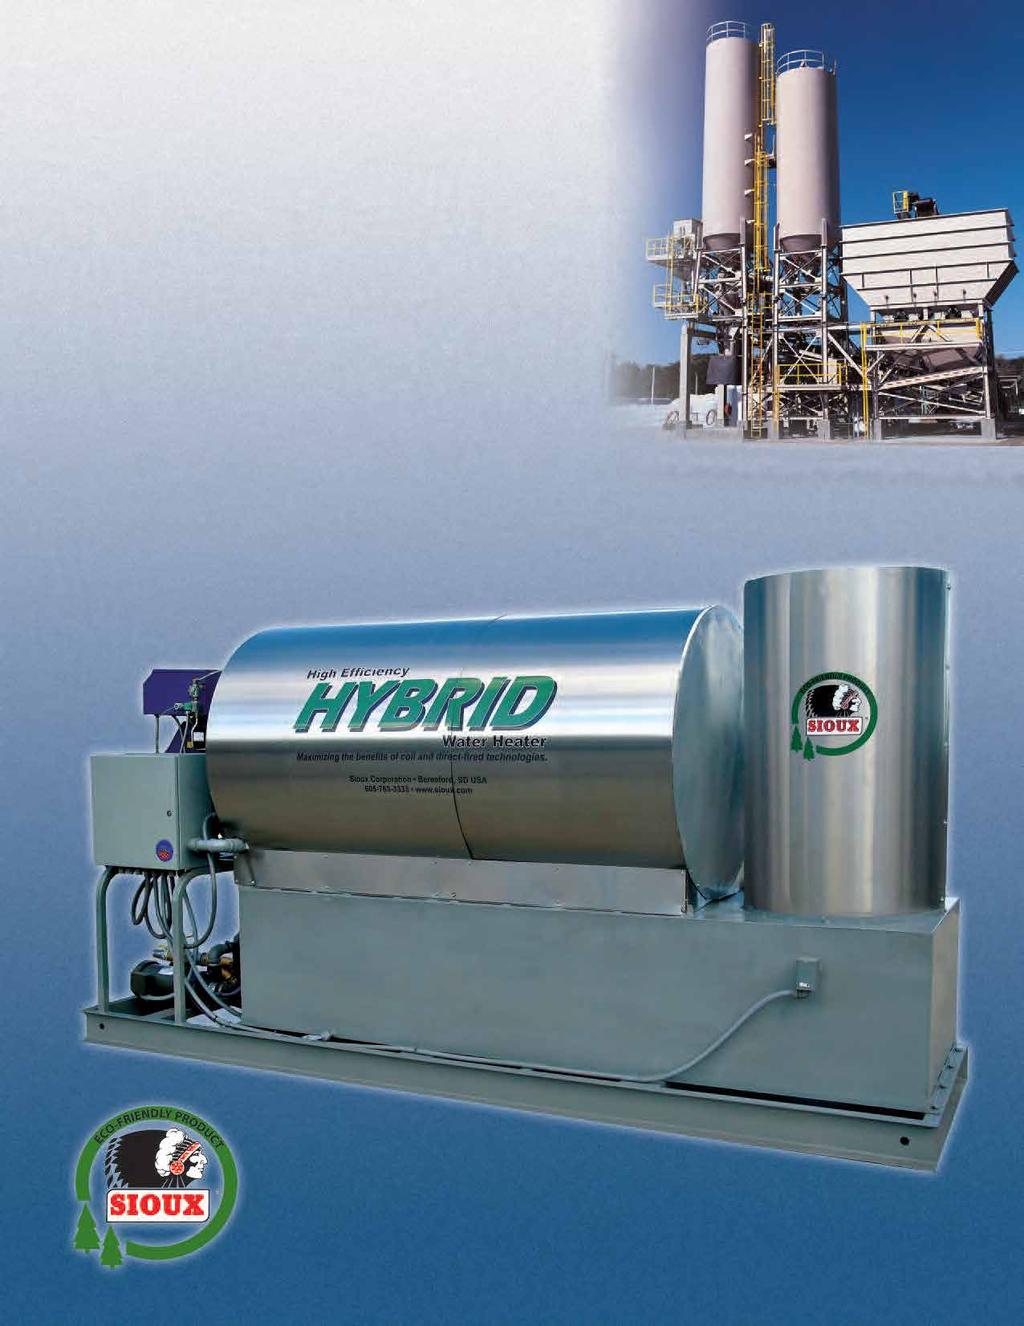 SIOUX Hybrid Water Heater for the Concrete Industry SIOUX HYBRID WATER HEATER Patent Pending Maximizing the Benefits of Coil and Direct-Fired Heating